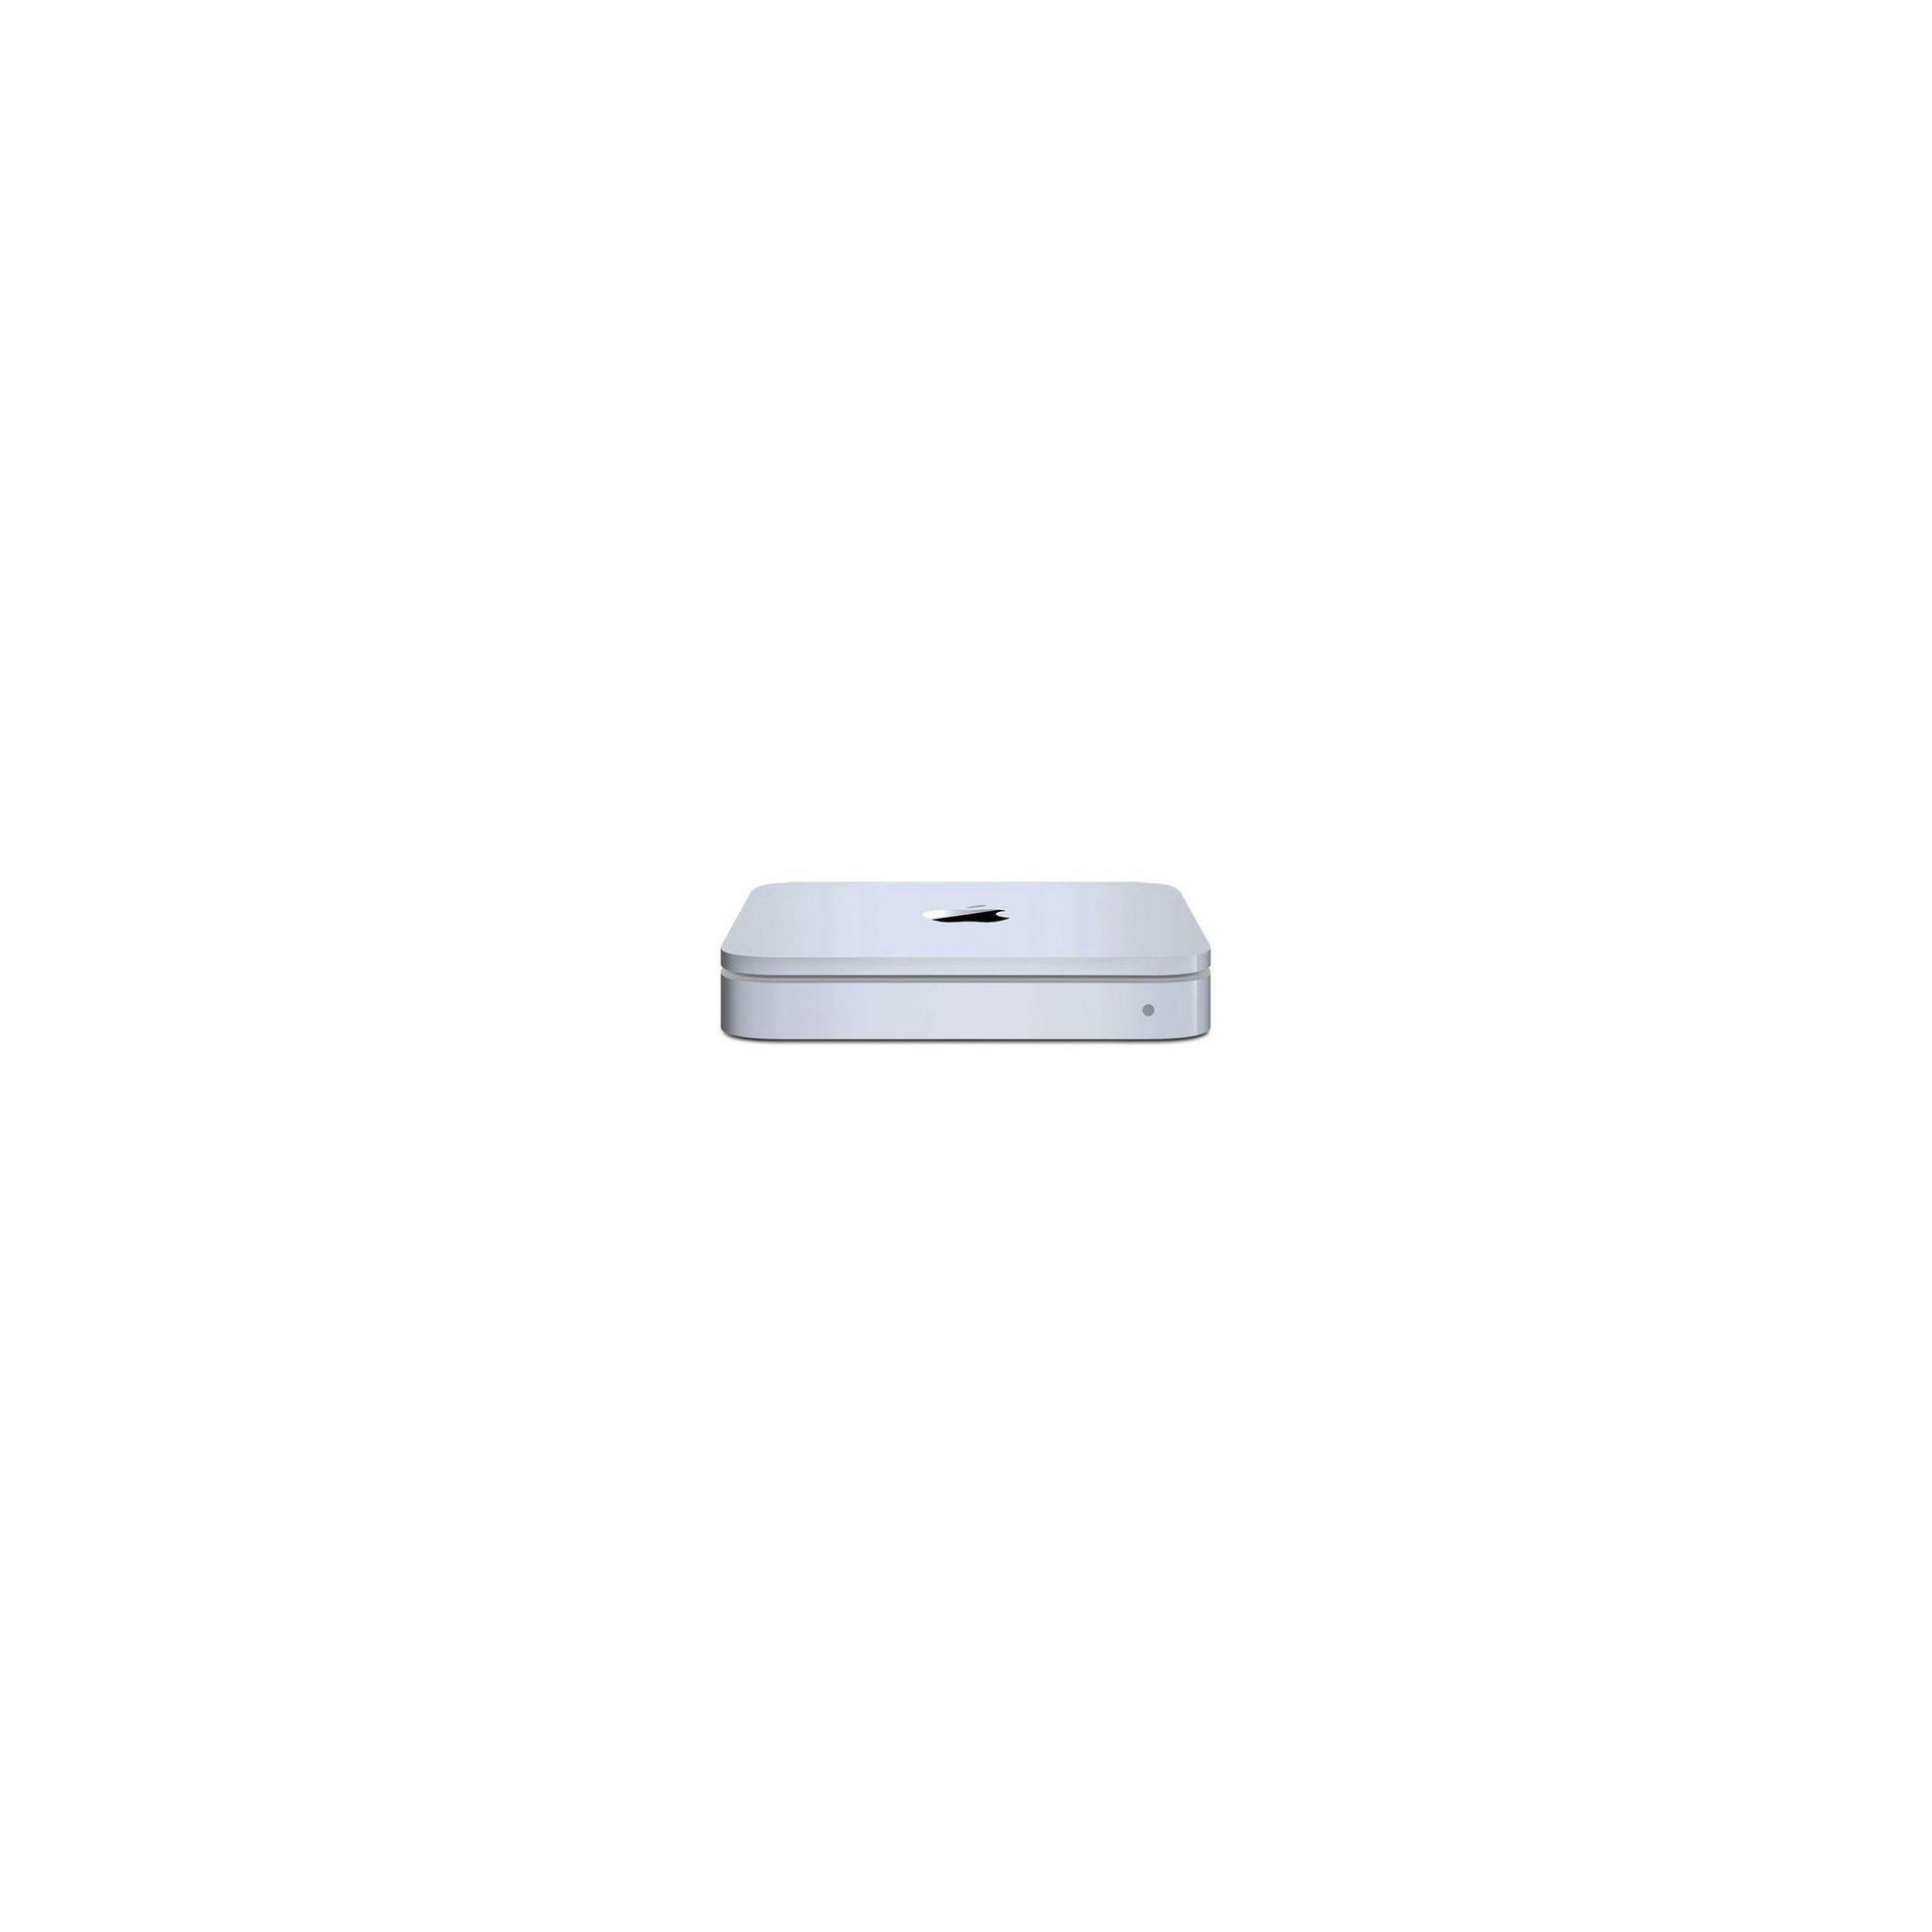 Apple Time Capsule Network Hard Drive - 2 Tb (Md032Z/A) at Tesco Direct